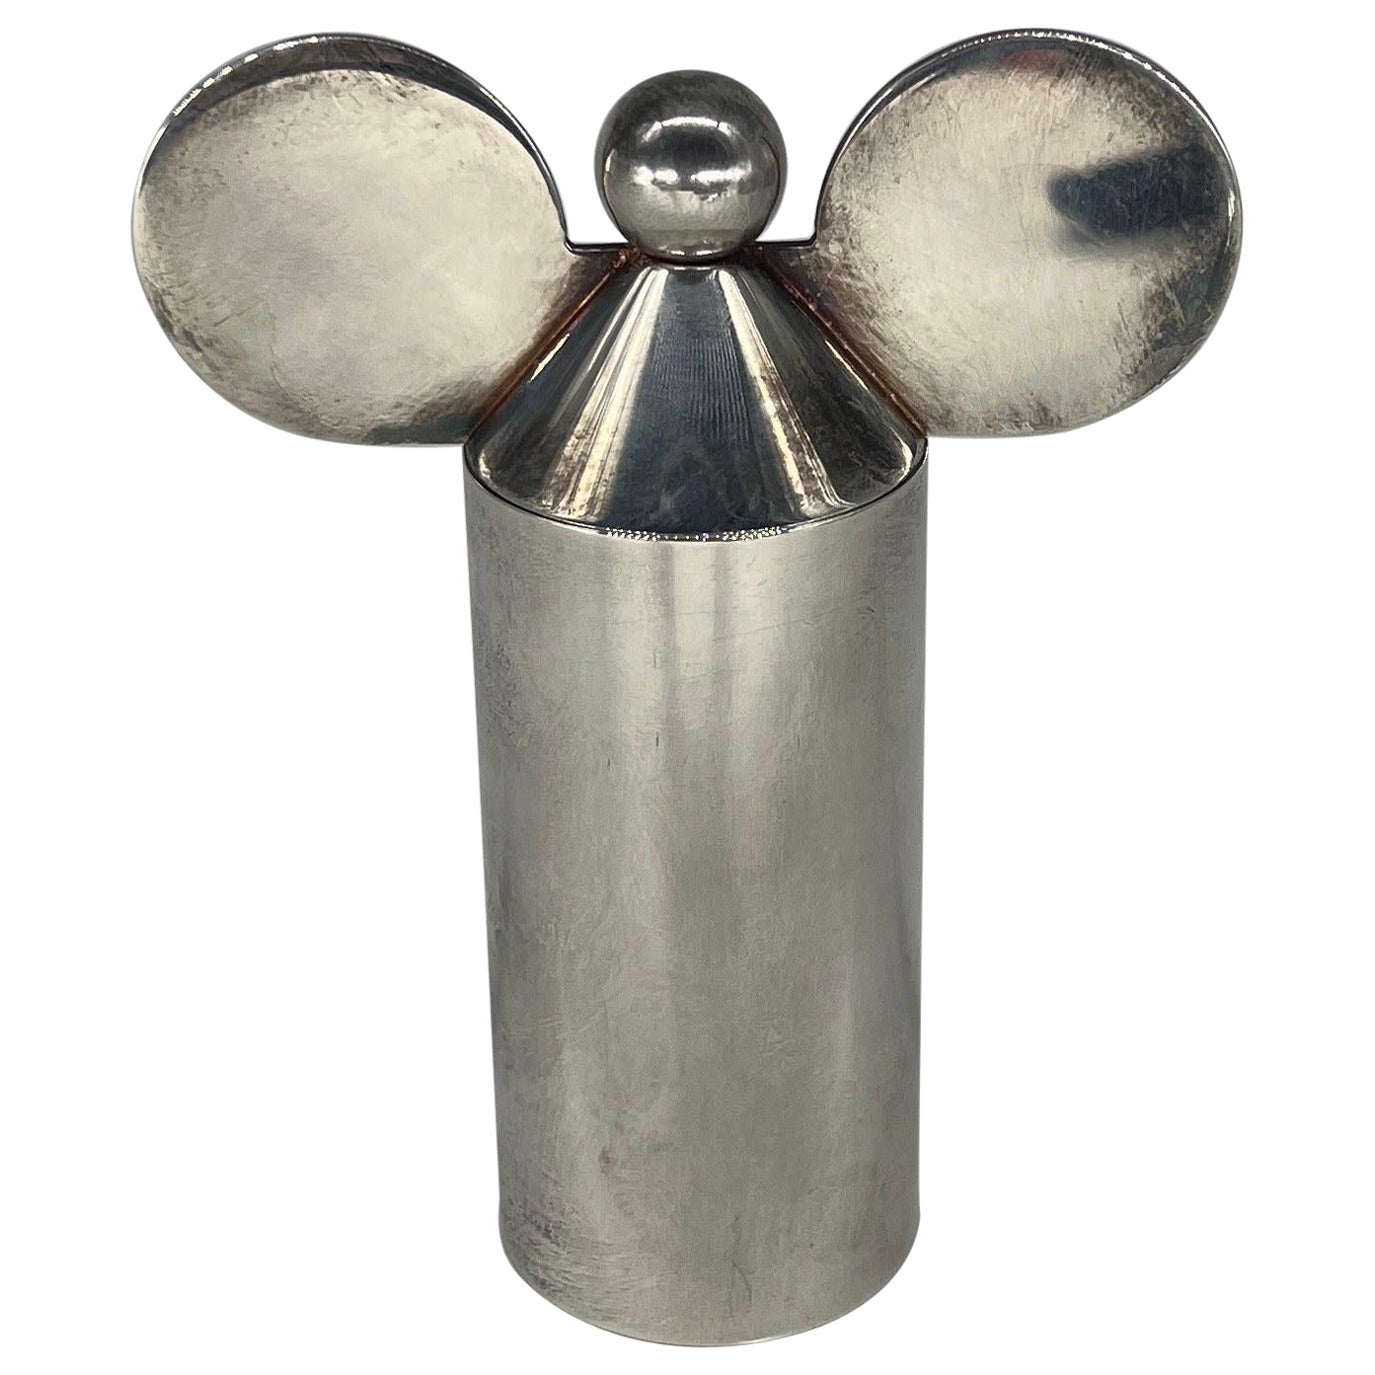 Haussmann Swid Powell "Mickey Mouse" Silver Plated Pepper Mill Grinder C. 1987